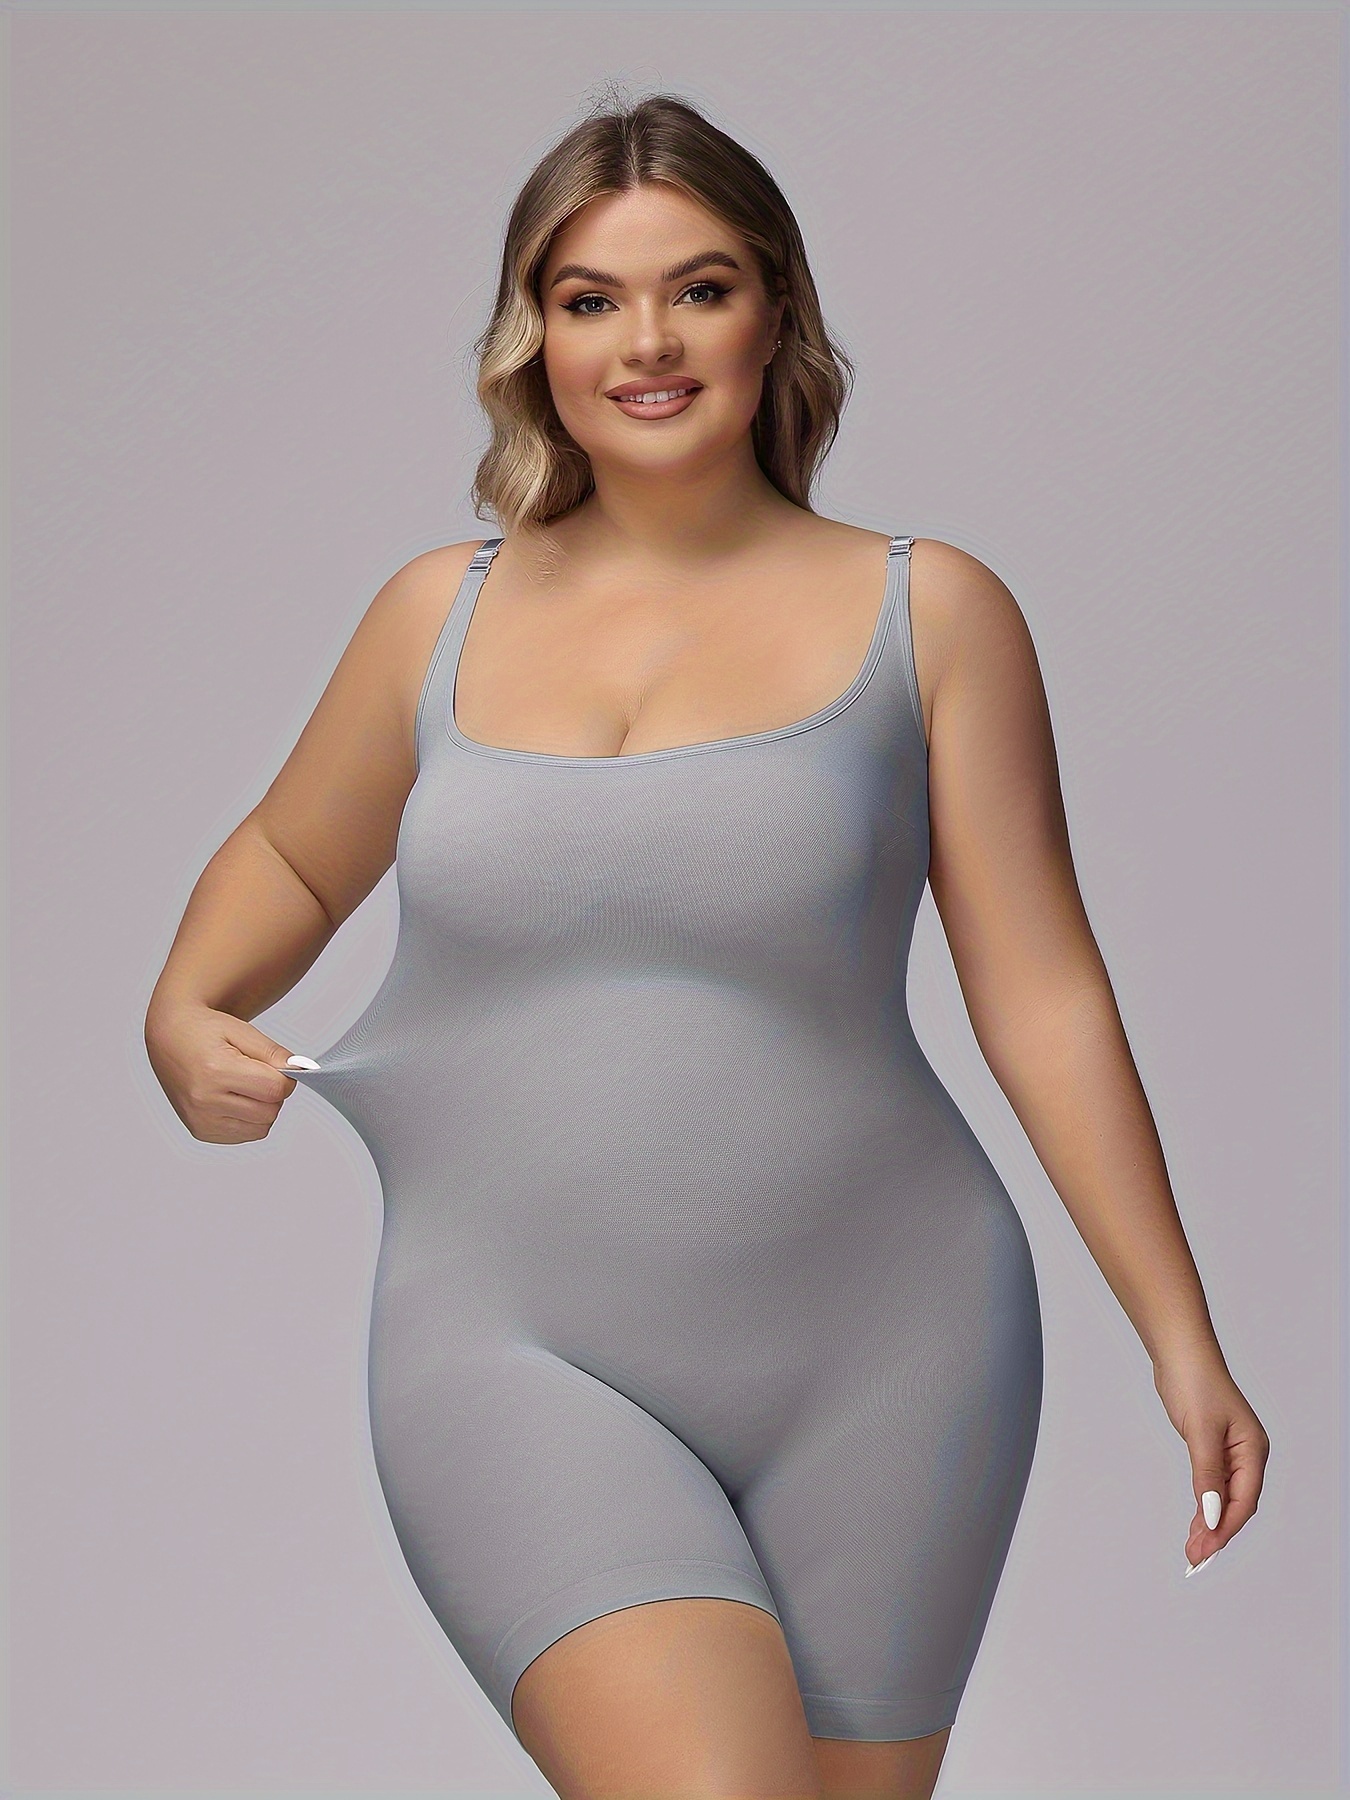 Same style different size. The full body tummy control comes in